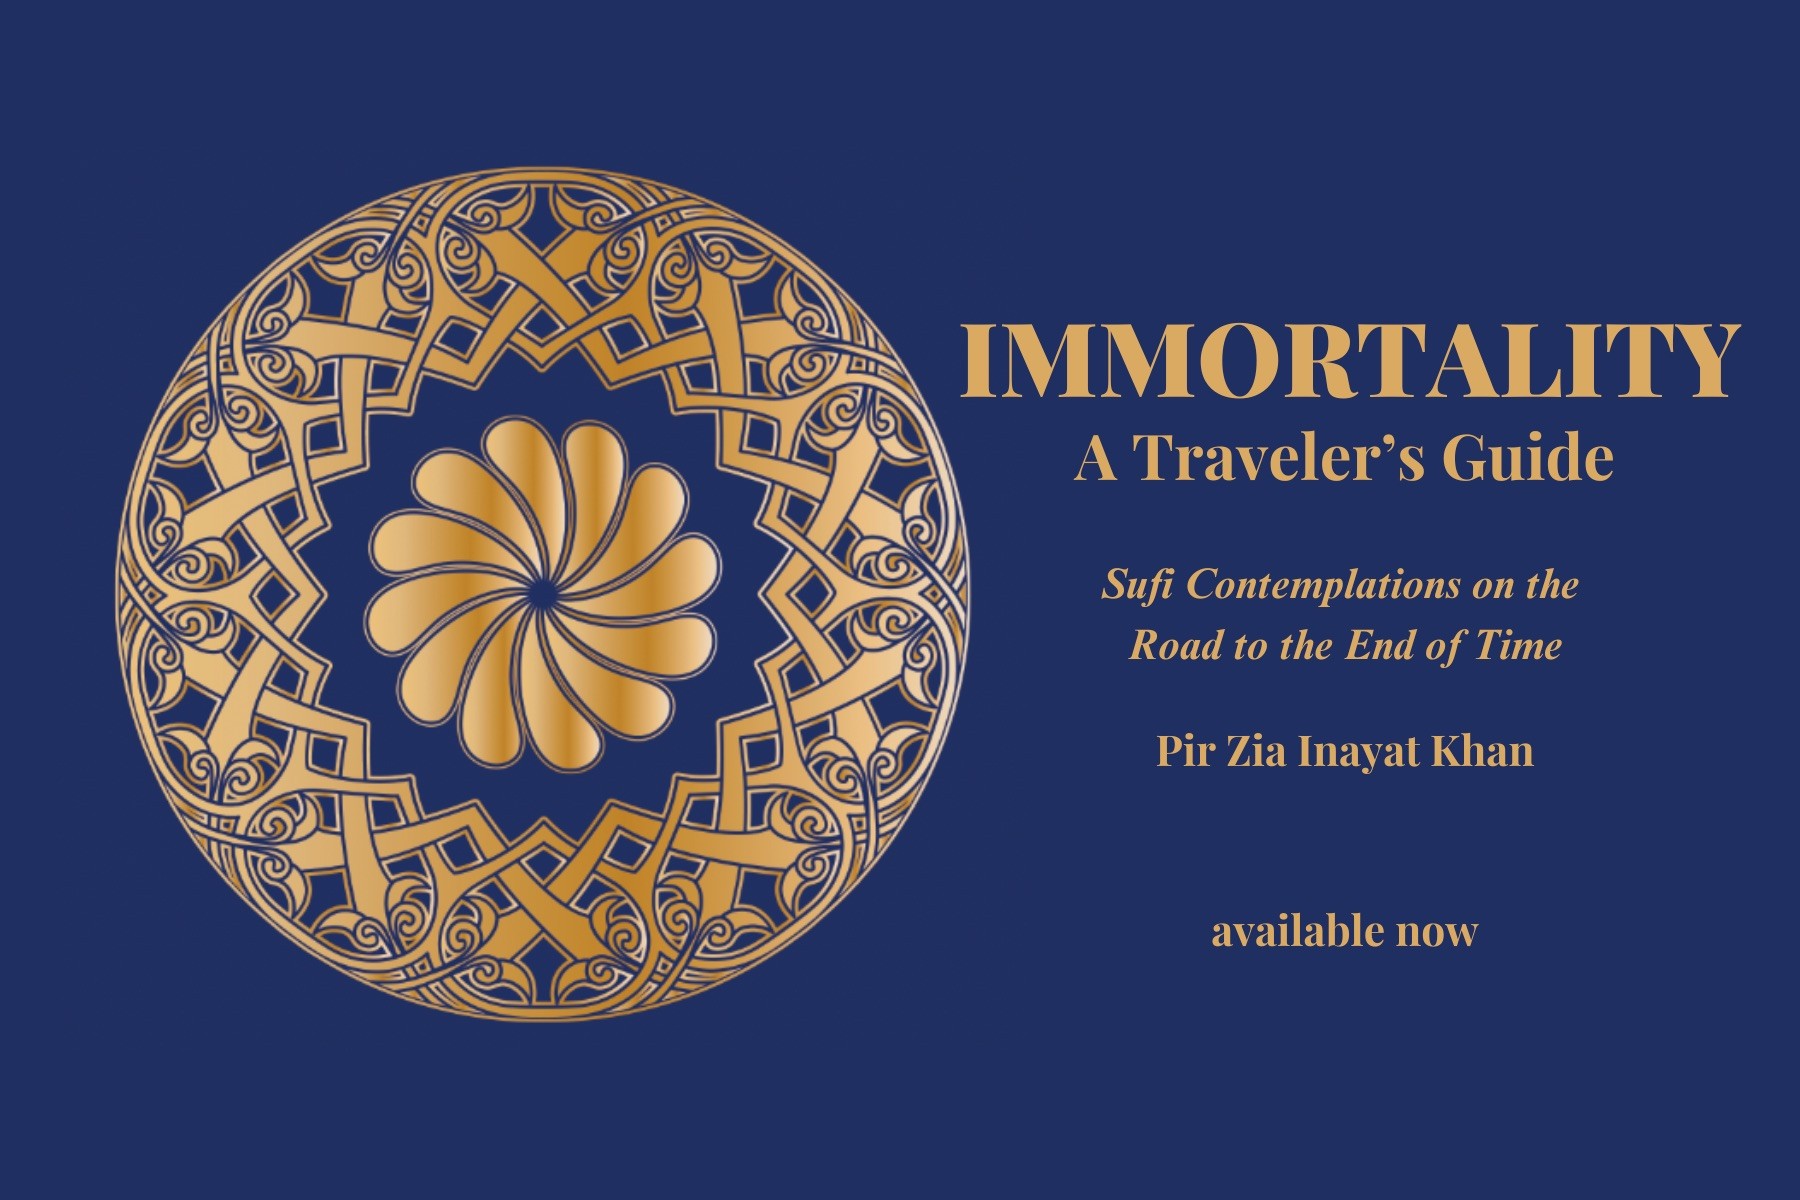 Immortality A Travelers Guide by Pir Zia Inayat Khan